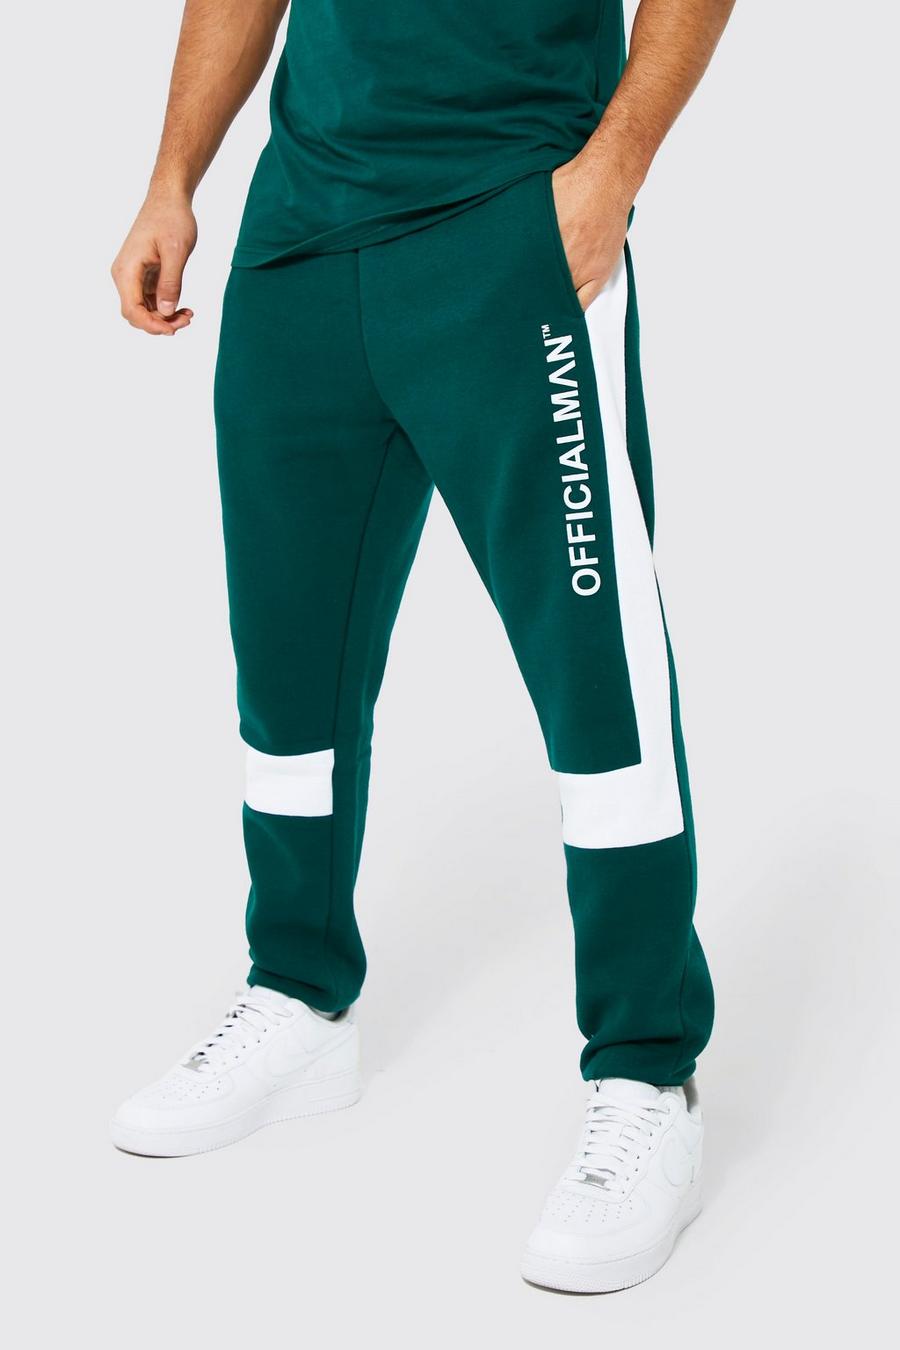 Forest Slim Official Man Colour Block Joggers image number 1